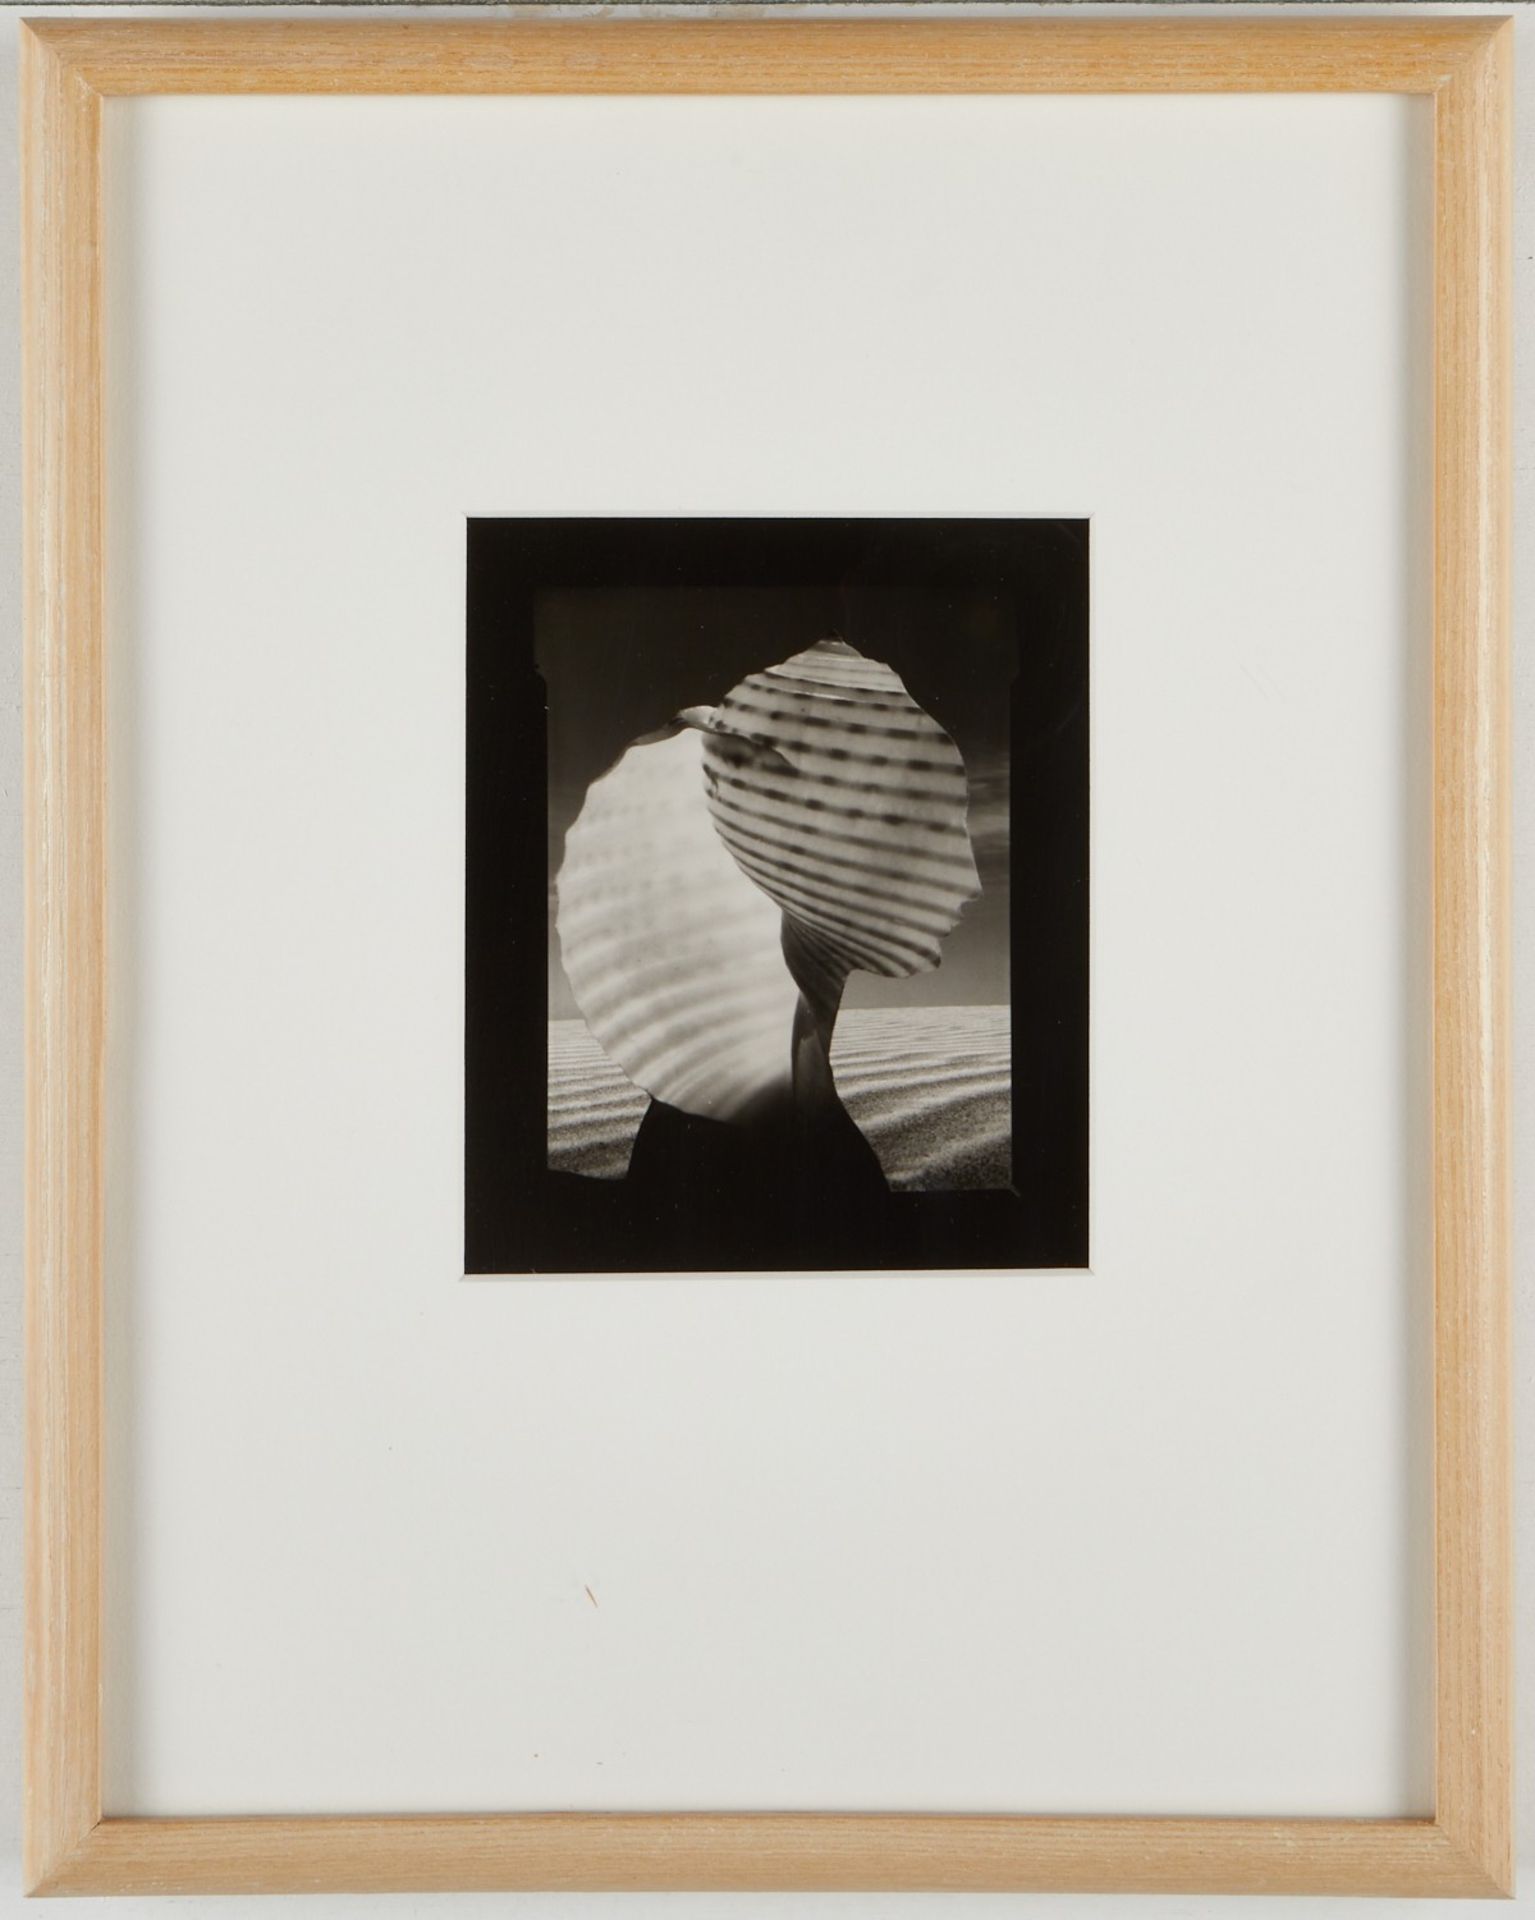 Ruth Thorne-Thomsen "Shell Head" Photo - Image 2 of 2